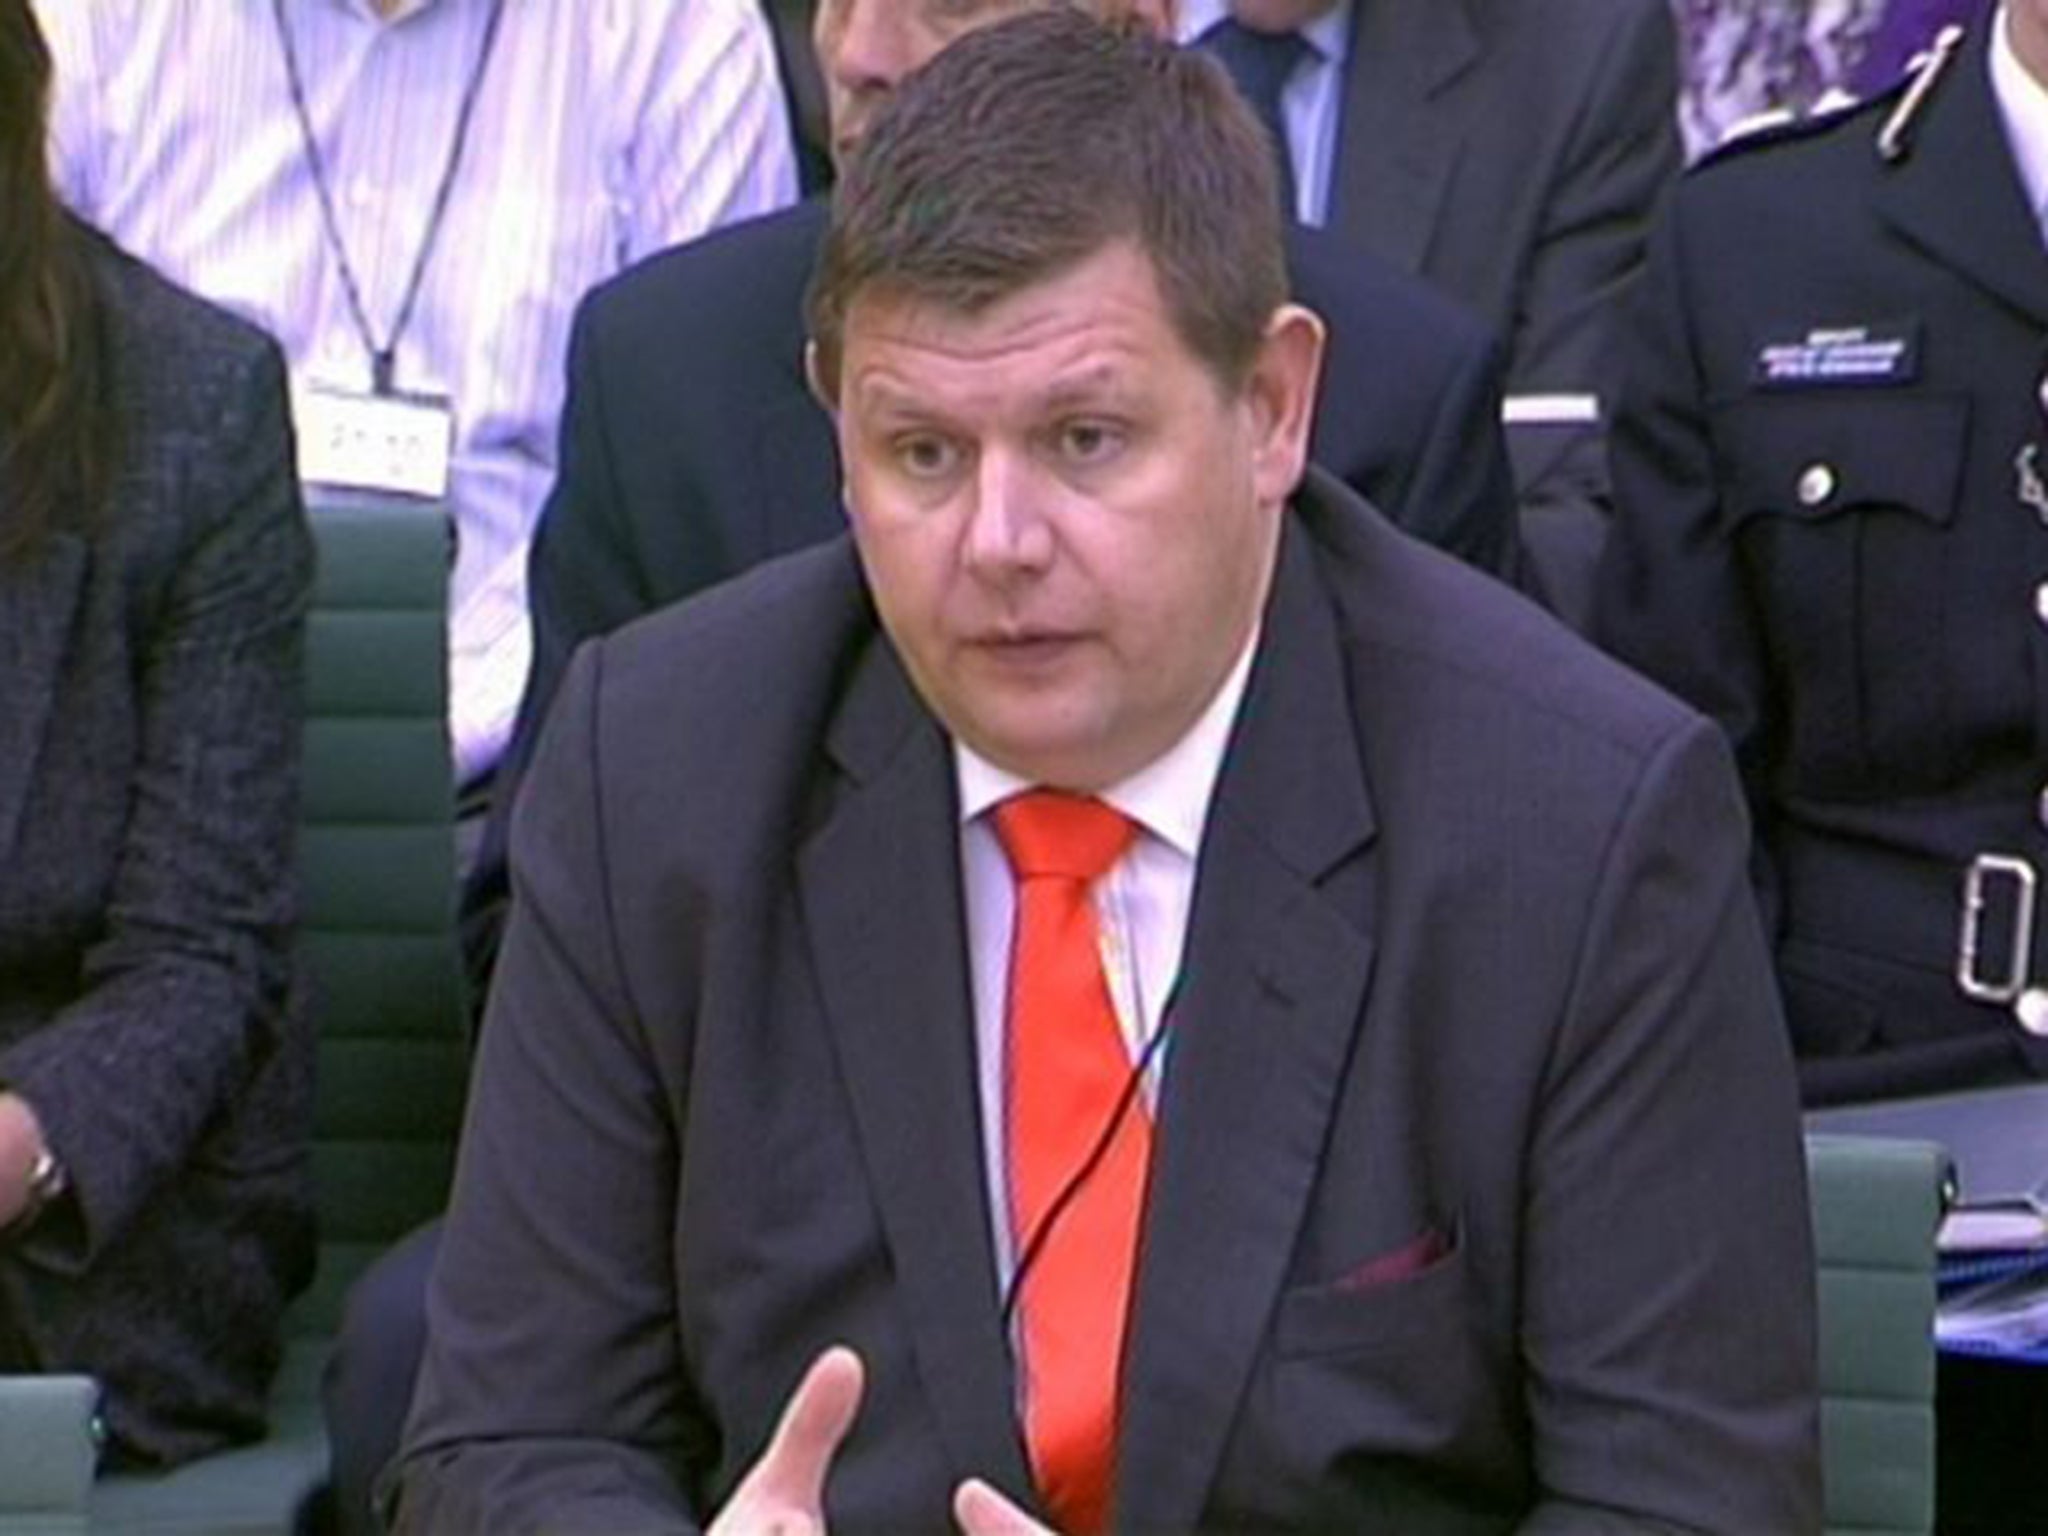 DCI Paul Settle questioned by the Home Affairs Select Committee last month